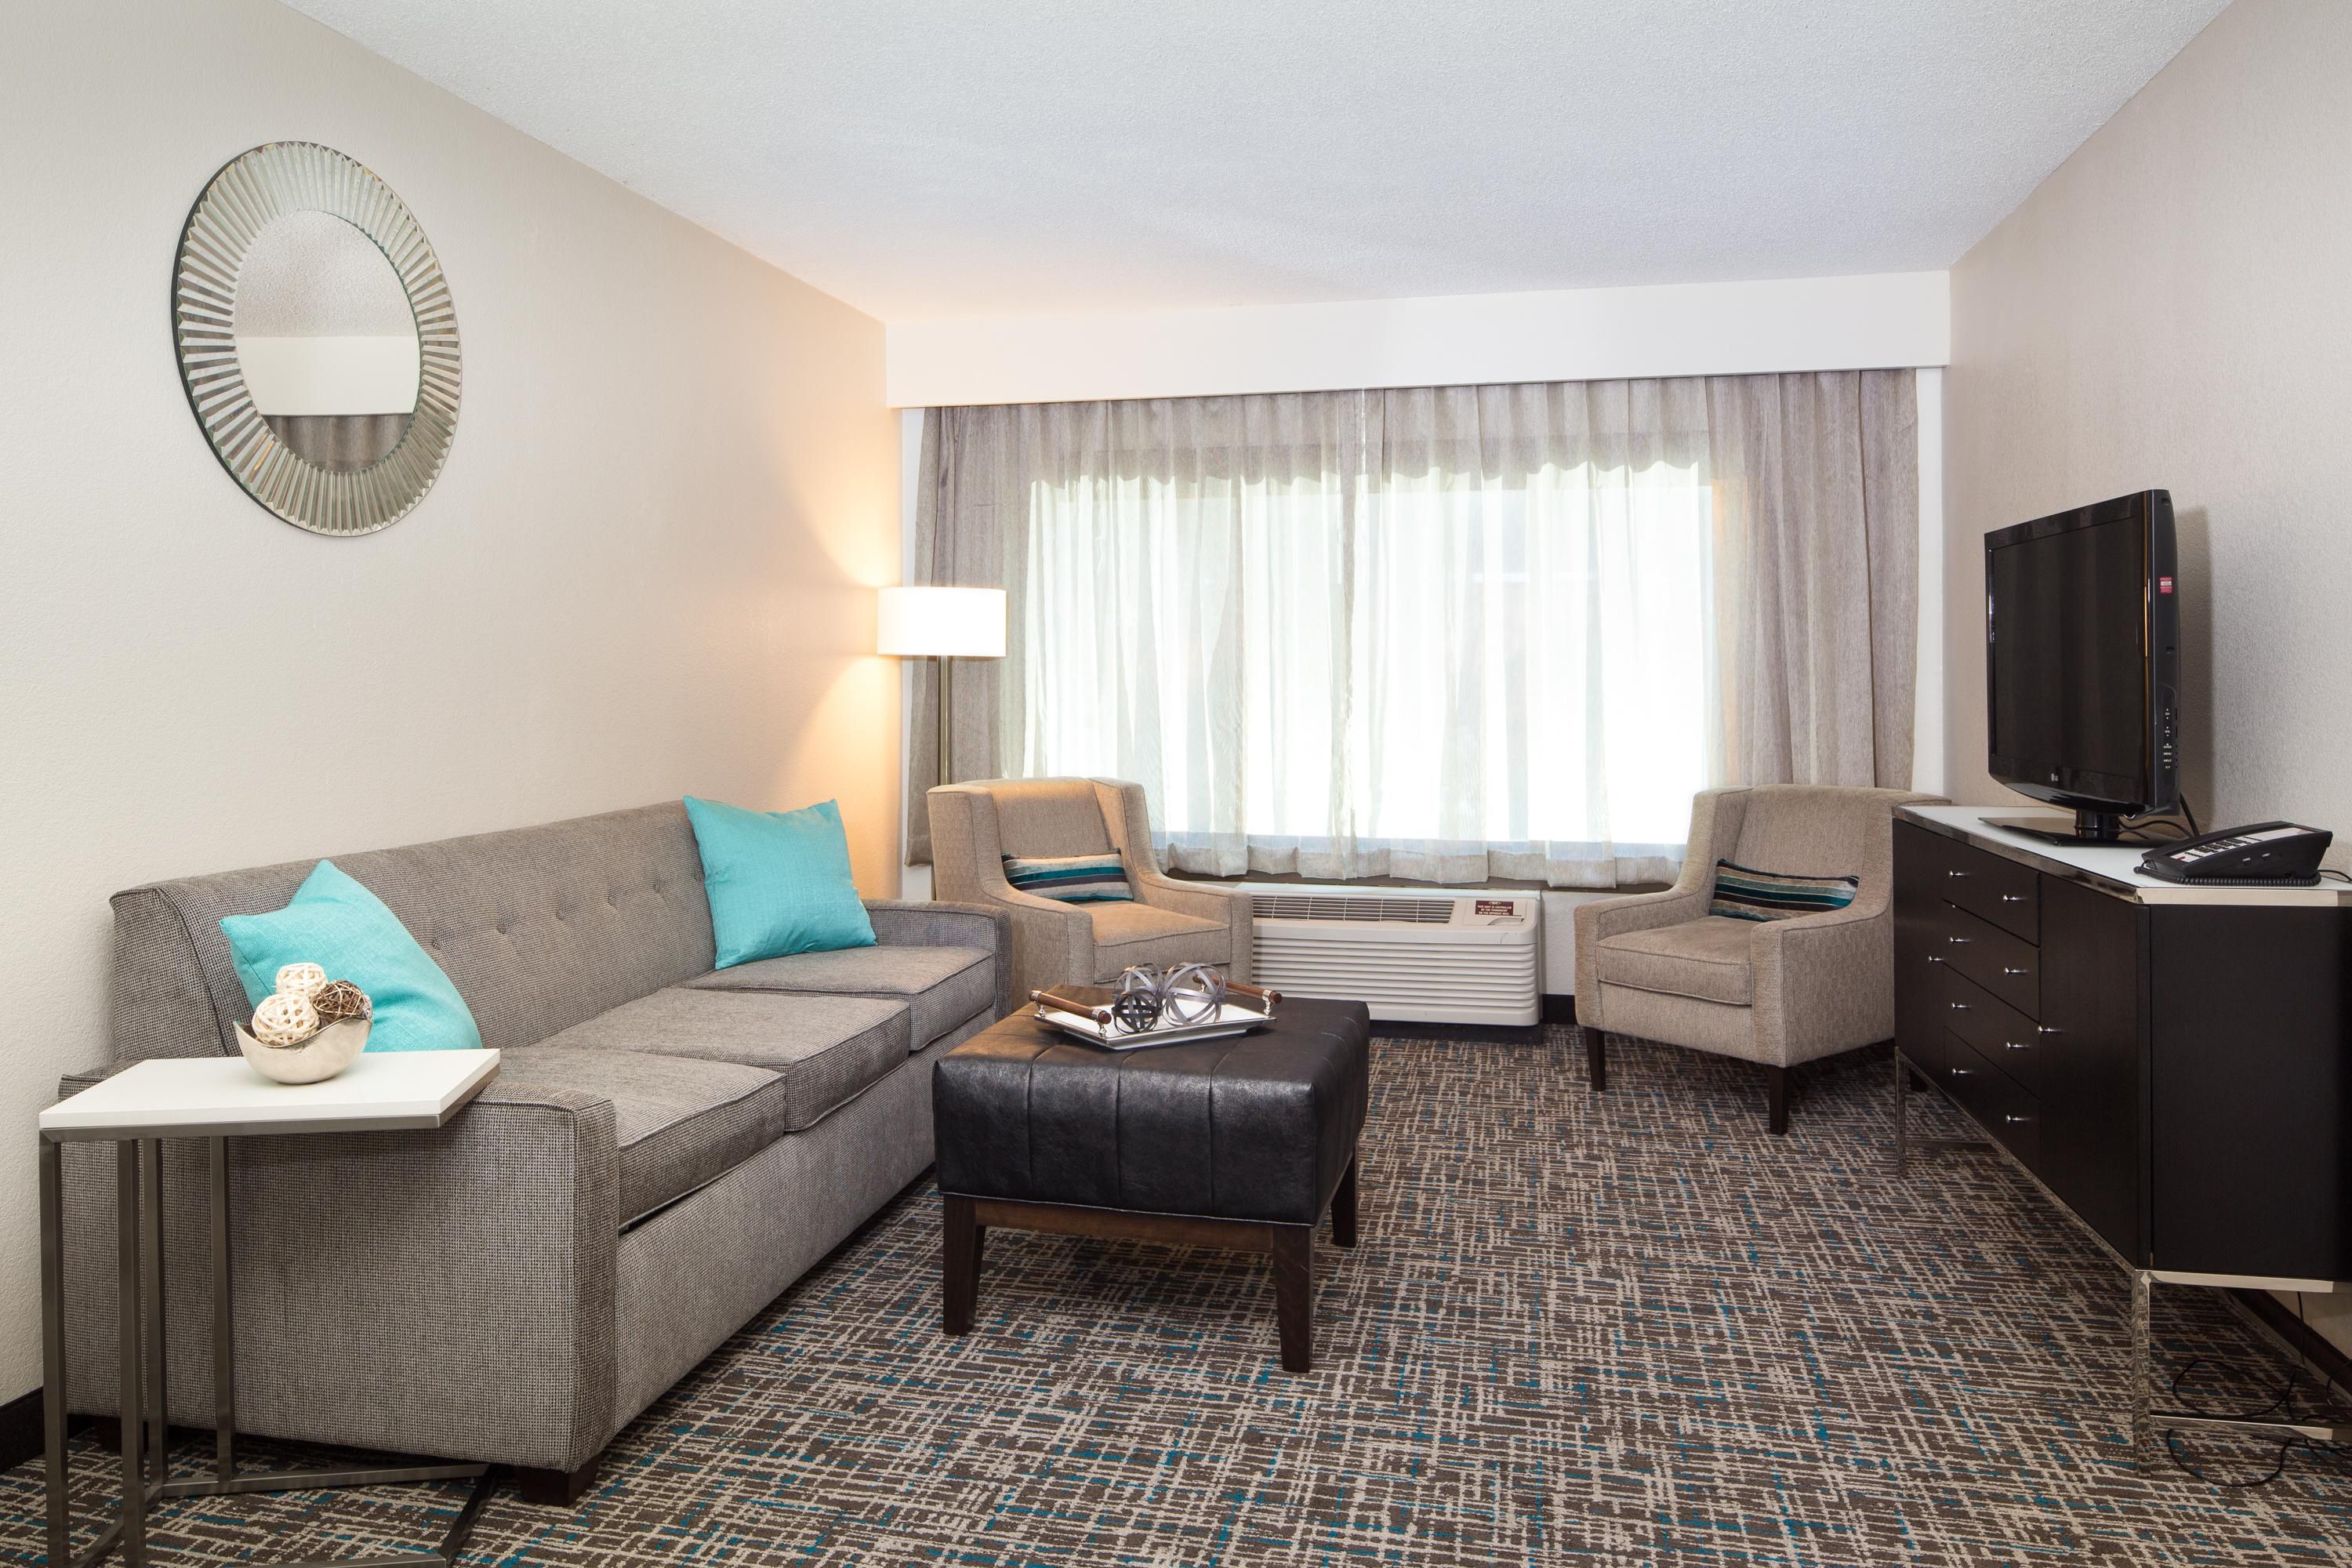 Relax in our updated rooms just a few street blocks from Beale St.